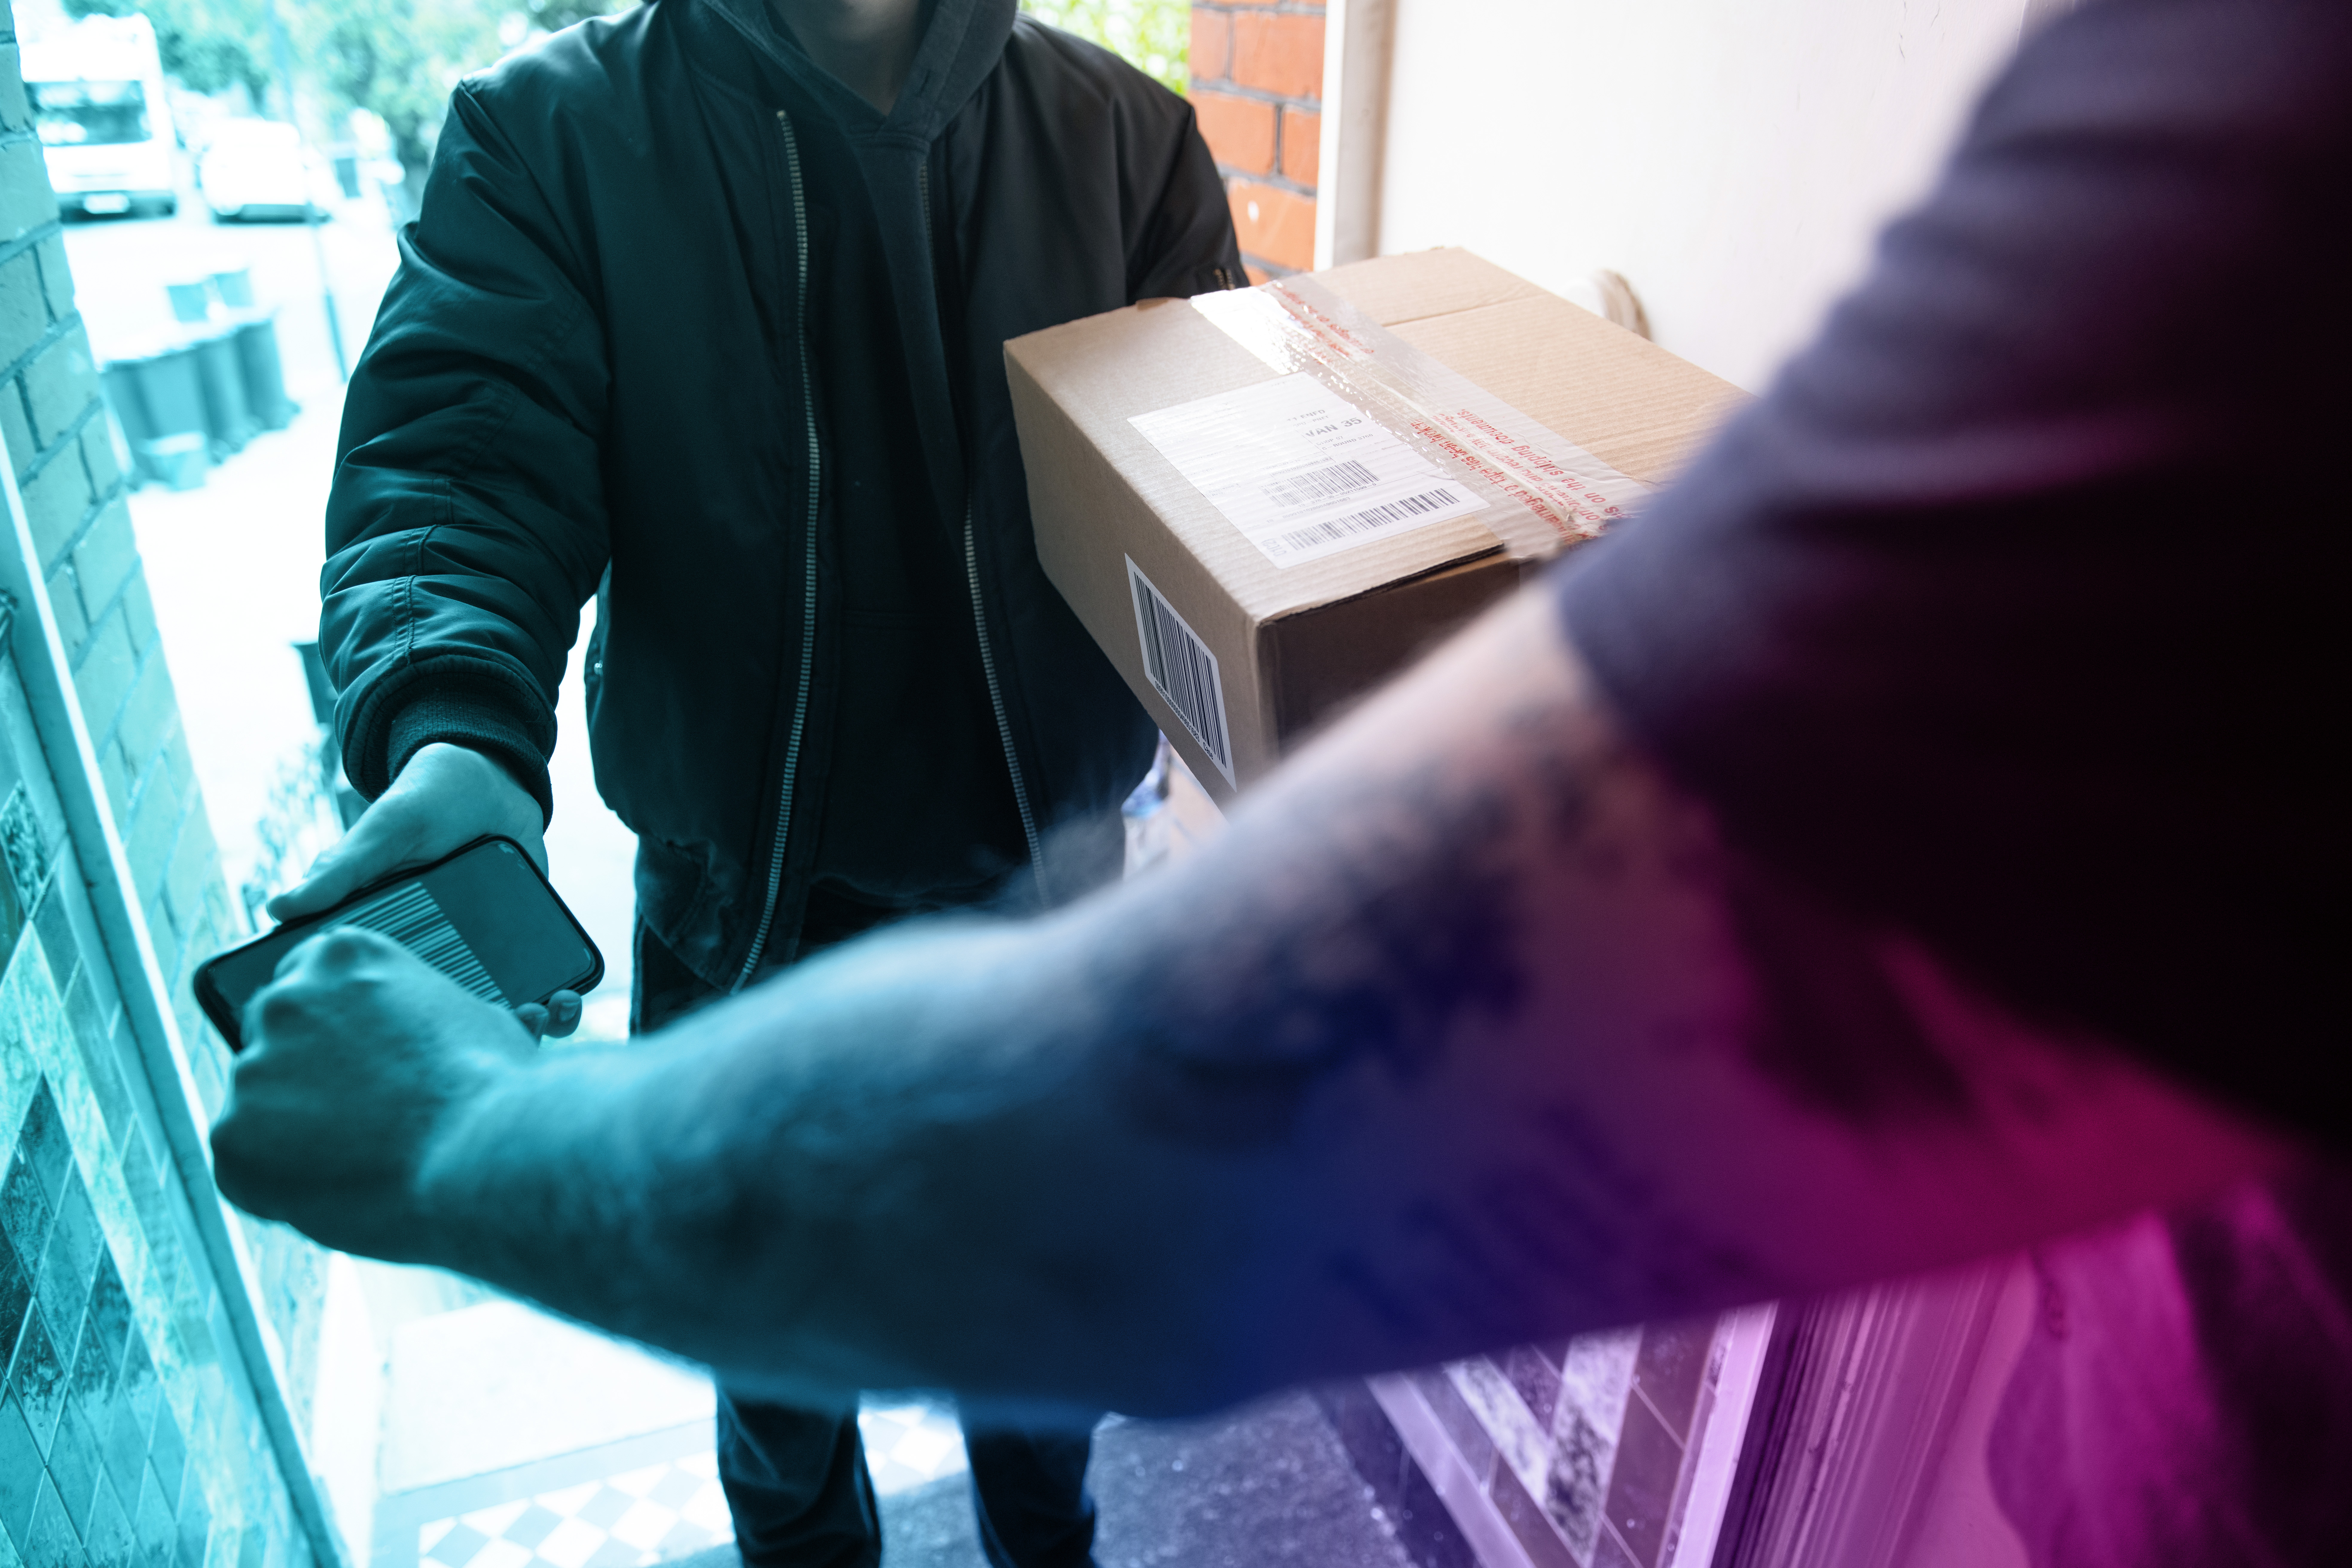 What standard delivery options should retailers offer?